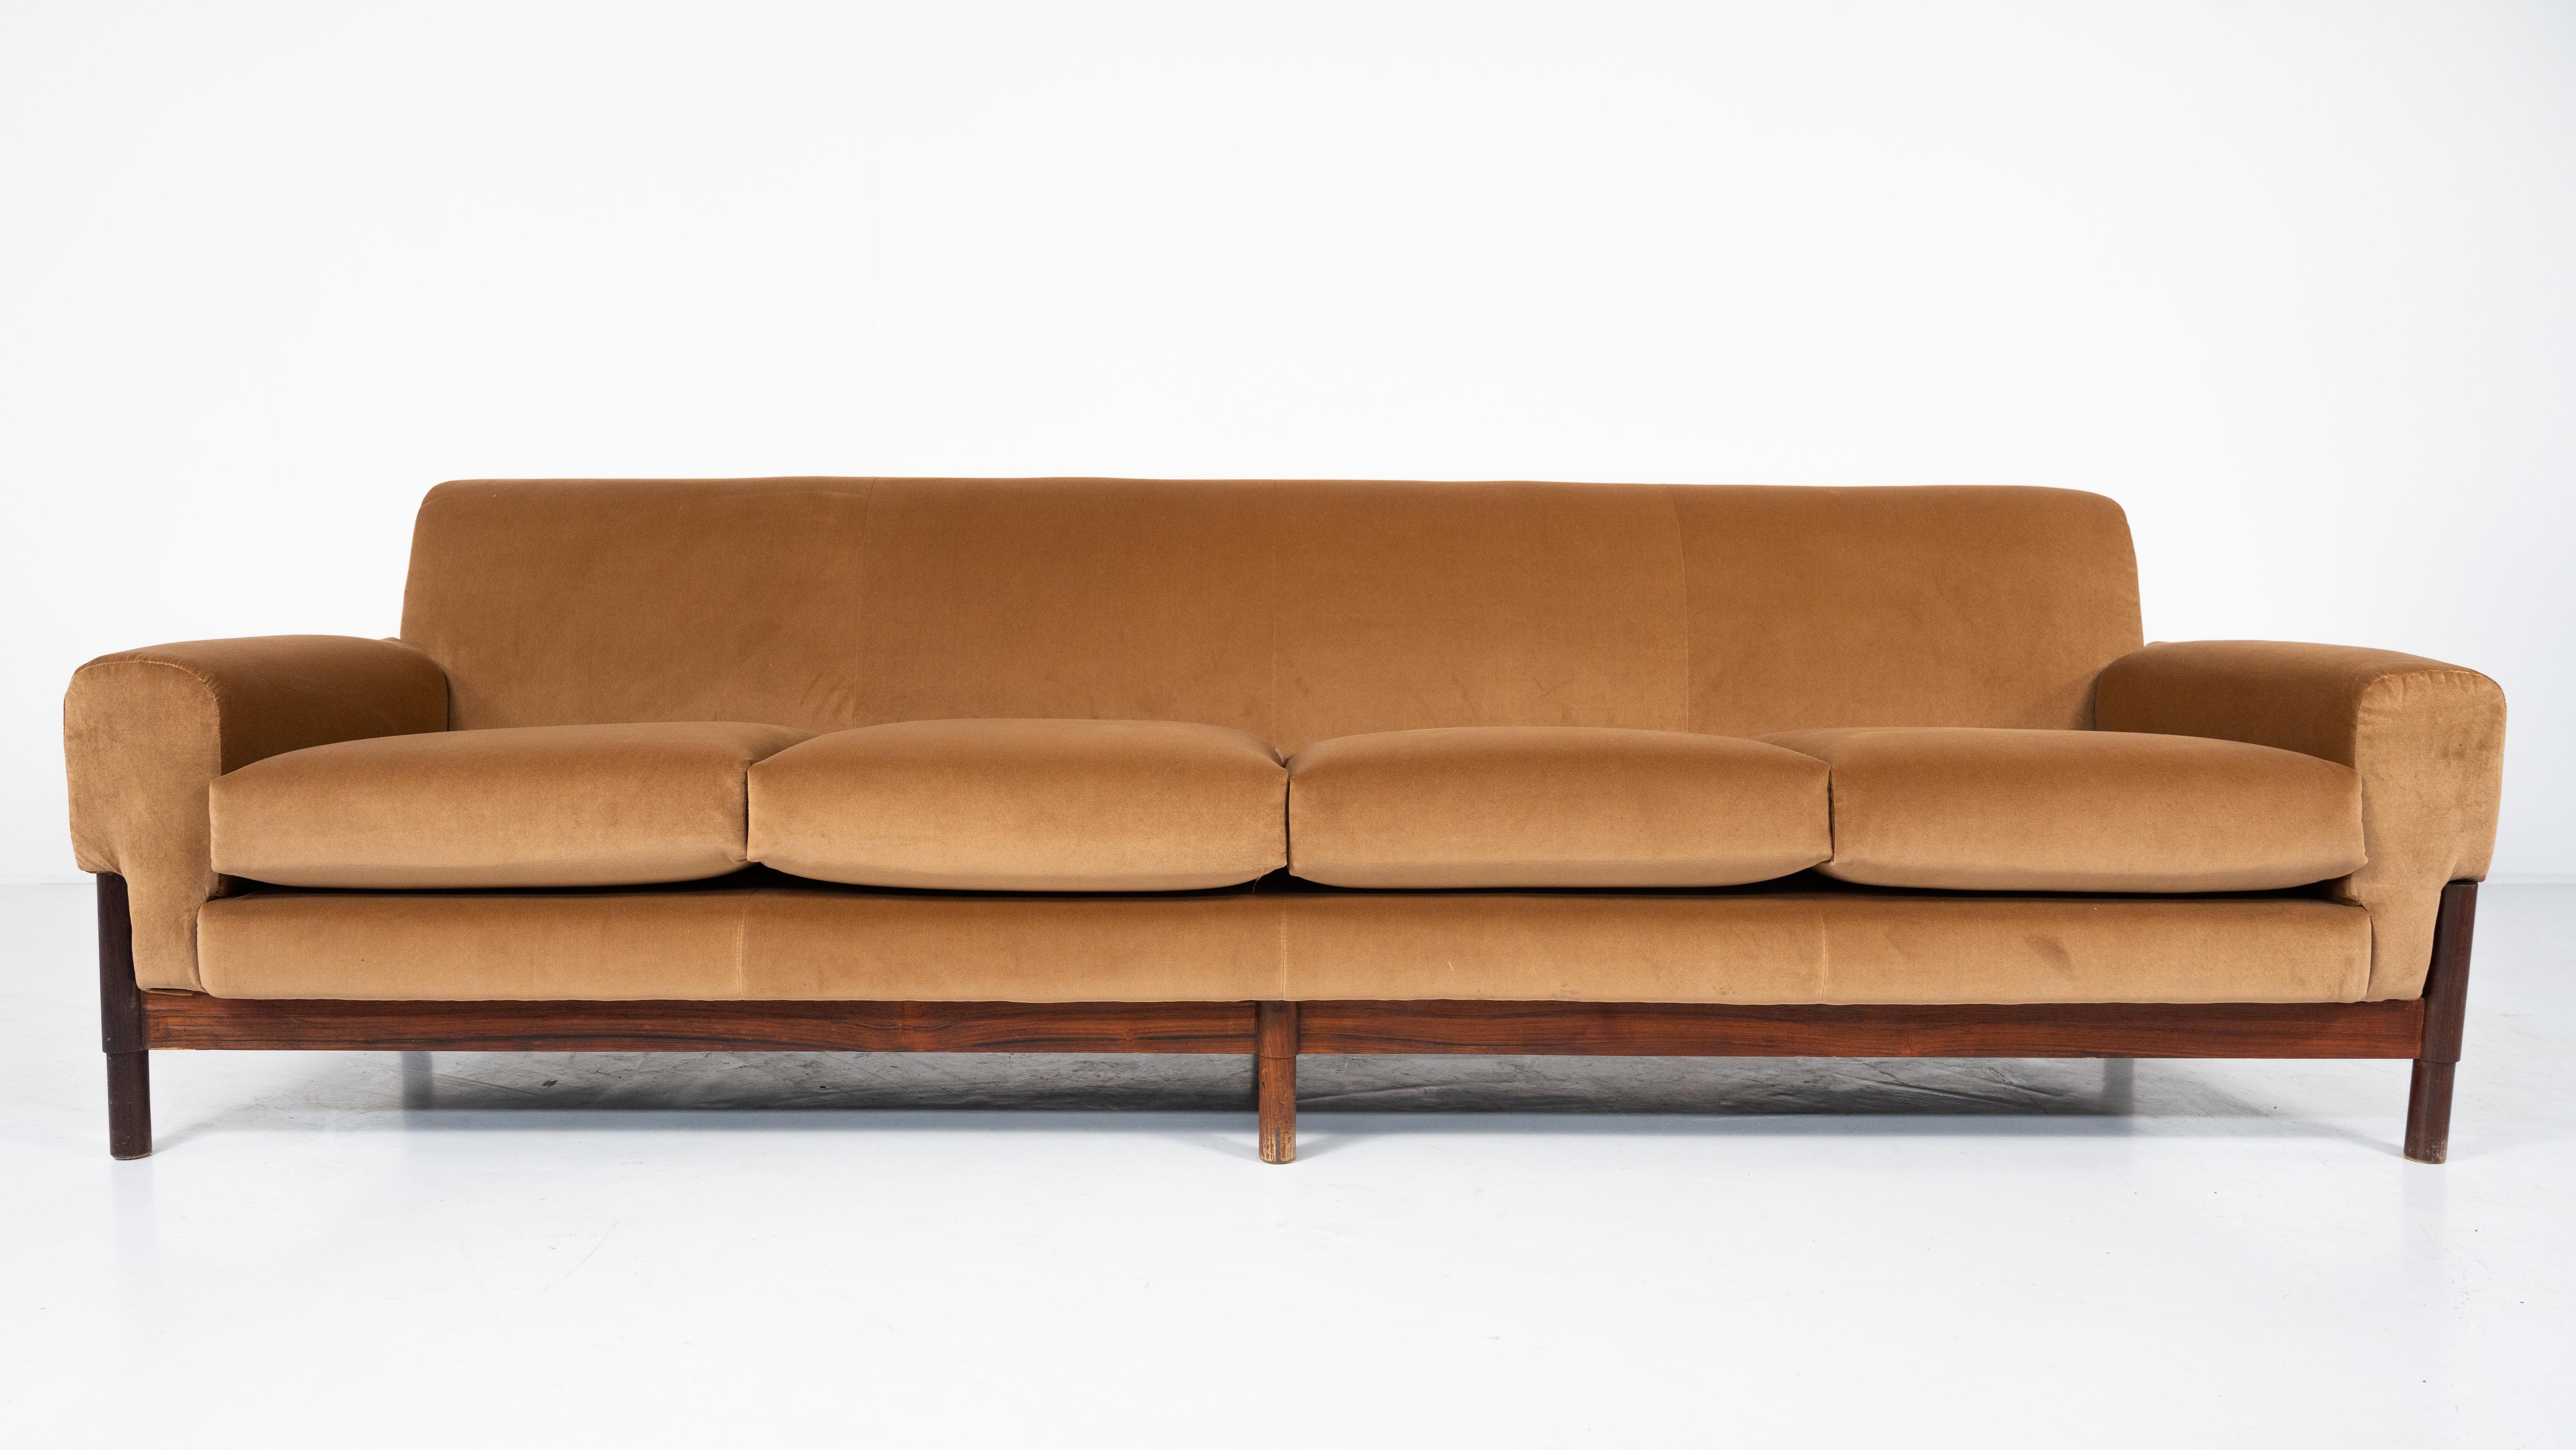 Italian Mid-Century Four Seater Sofa by Saporiti, Italy, 1960s - New Upholstery For Sale